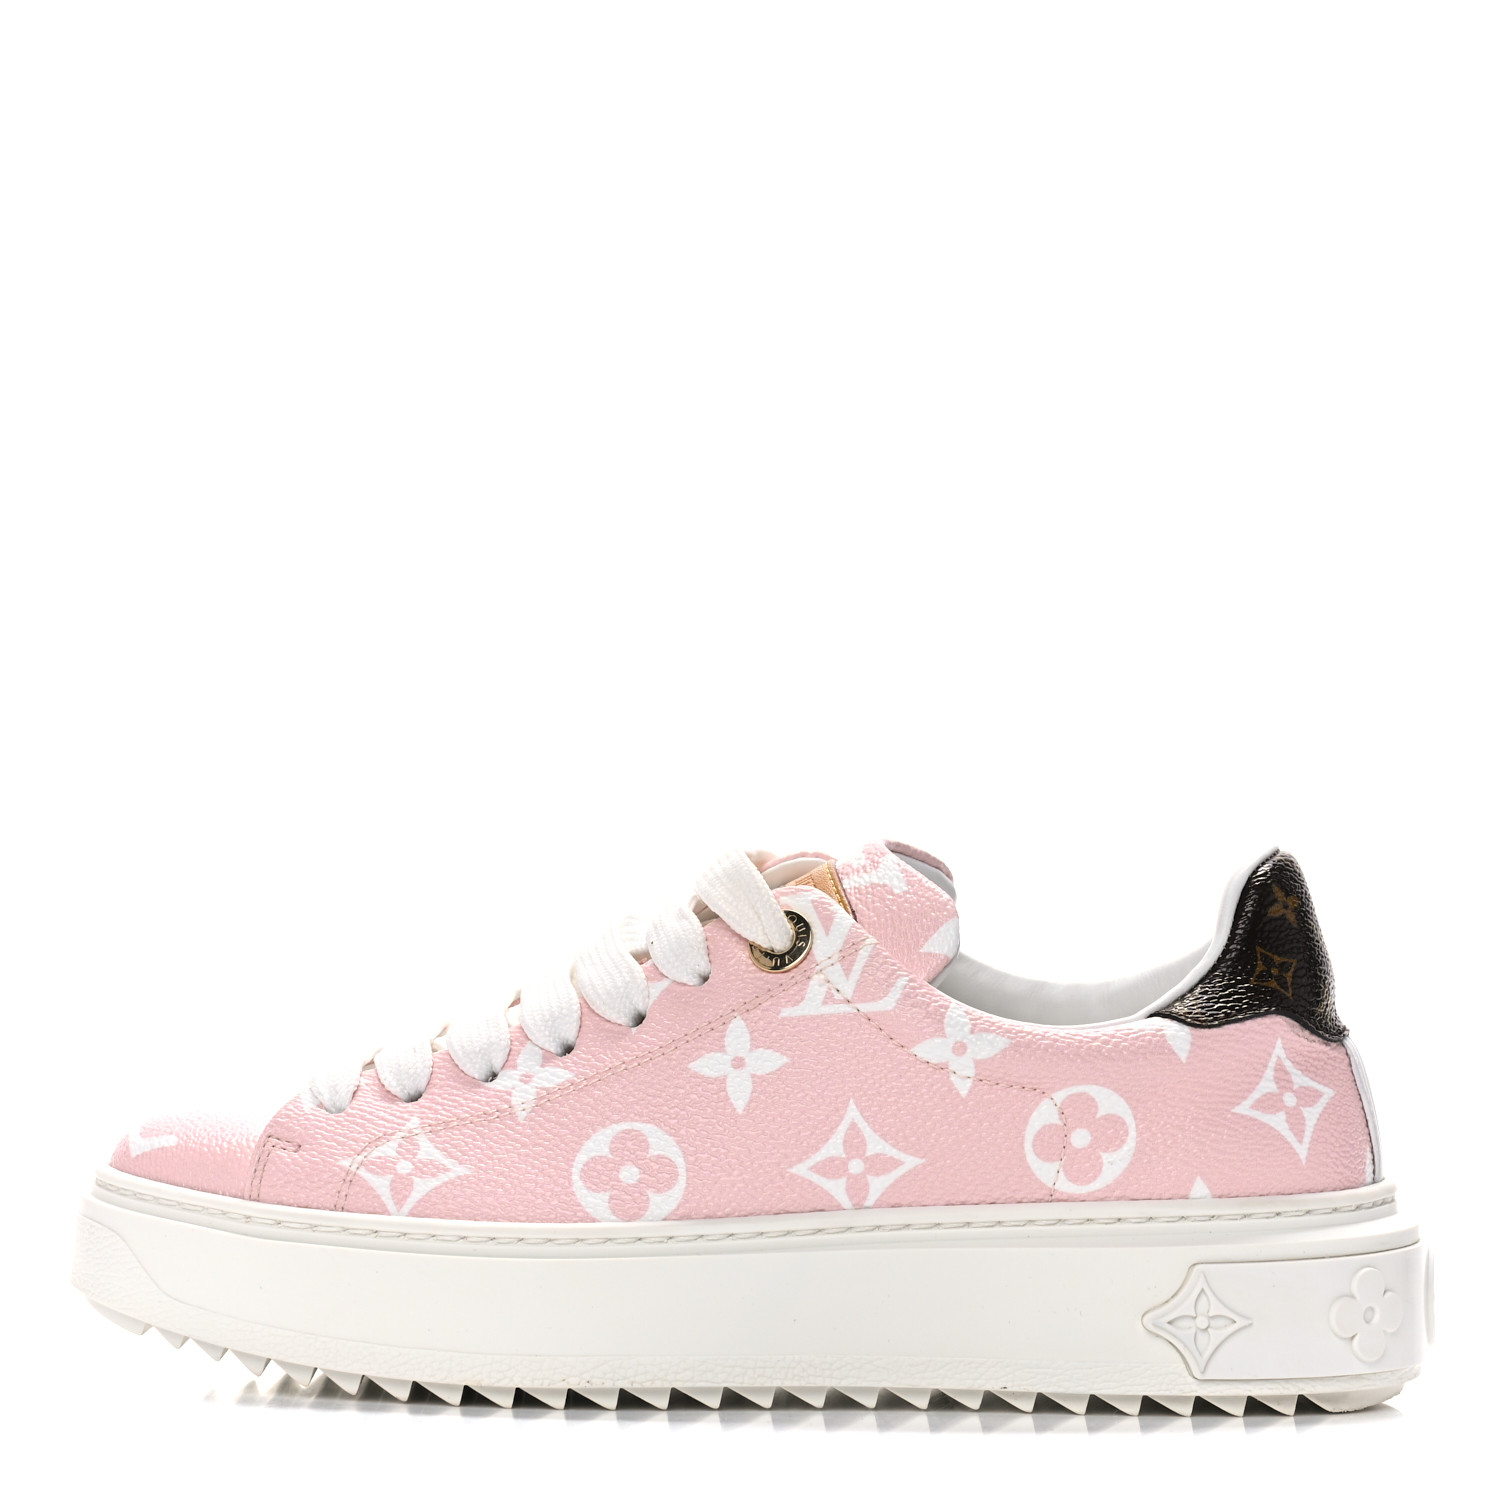 VUITTON Monogram Giant Time Out Sneakers Rose 903649 | FASHIONPHILE